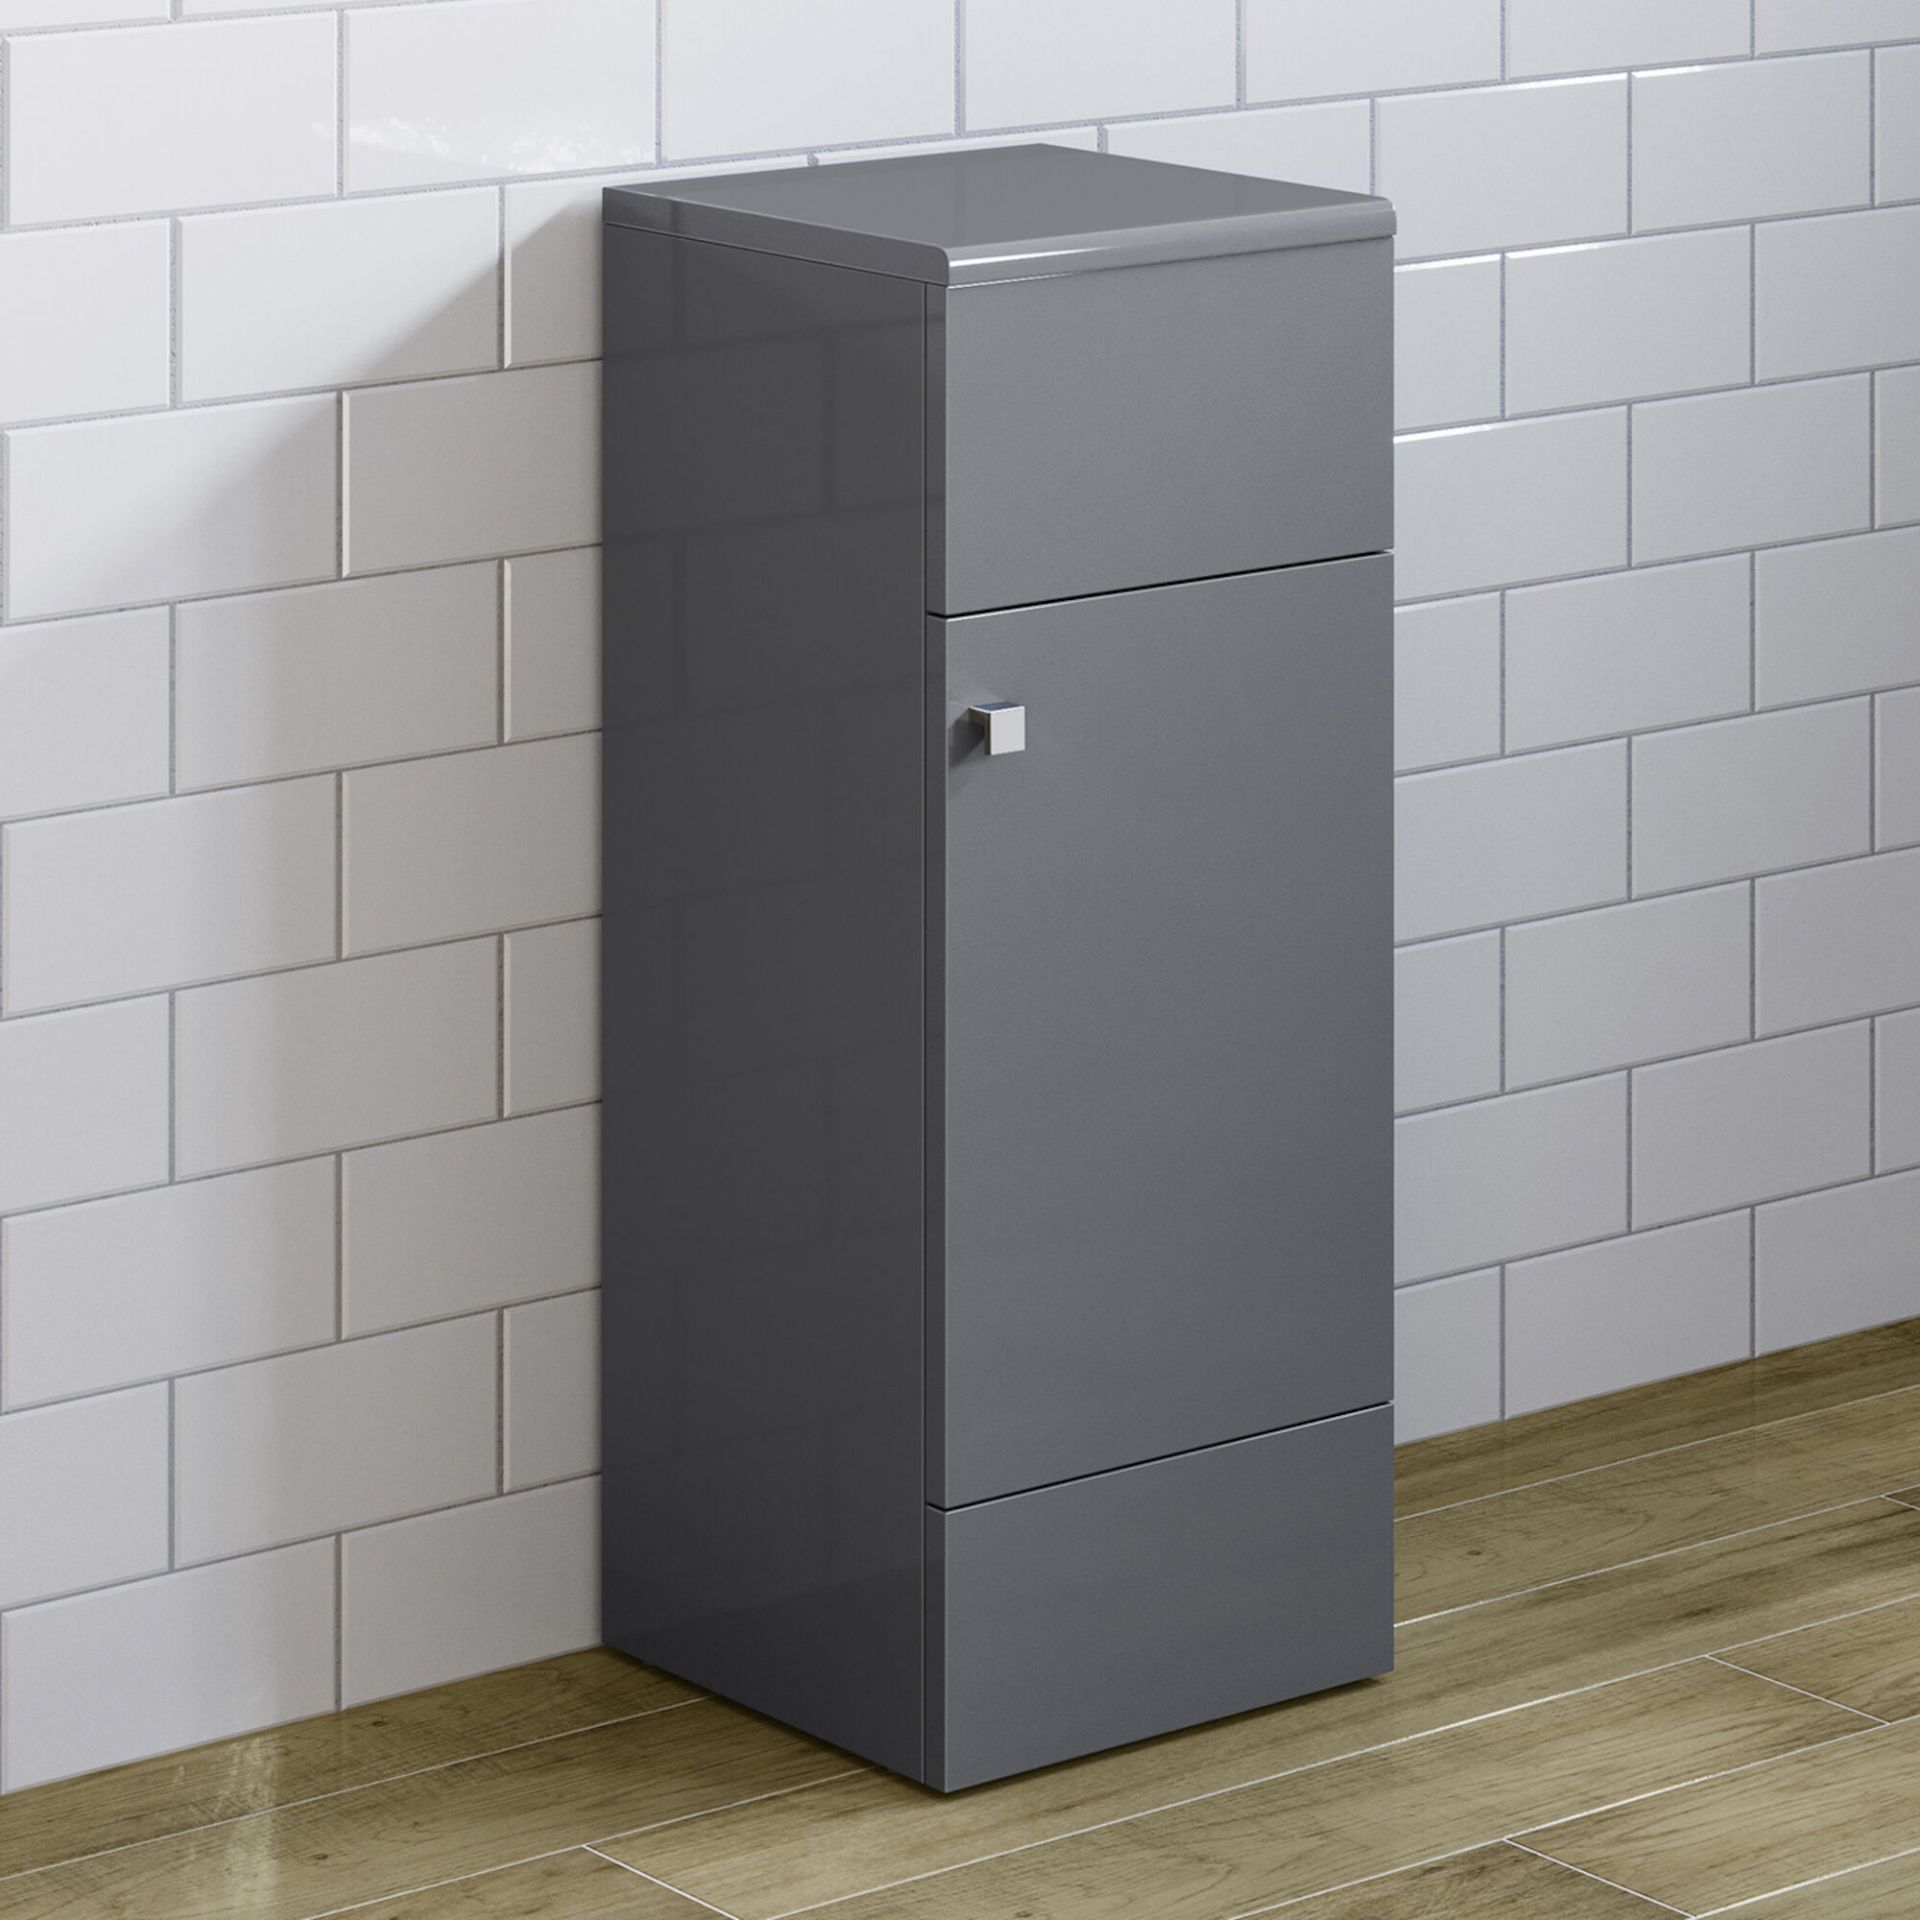 (AA78) 300mm Dayton Gloss Grey Small Side Cabinet Unit. RRP £209.99. Our compact unit offers t...